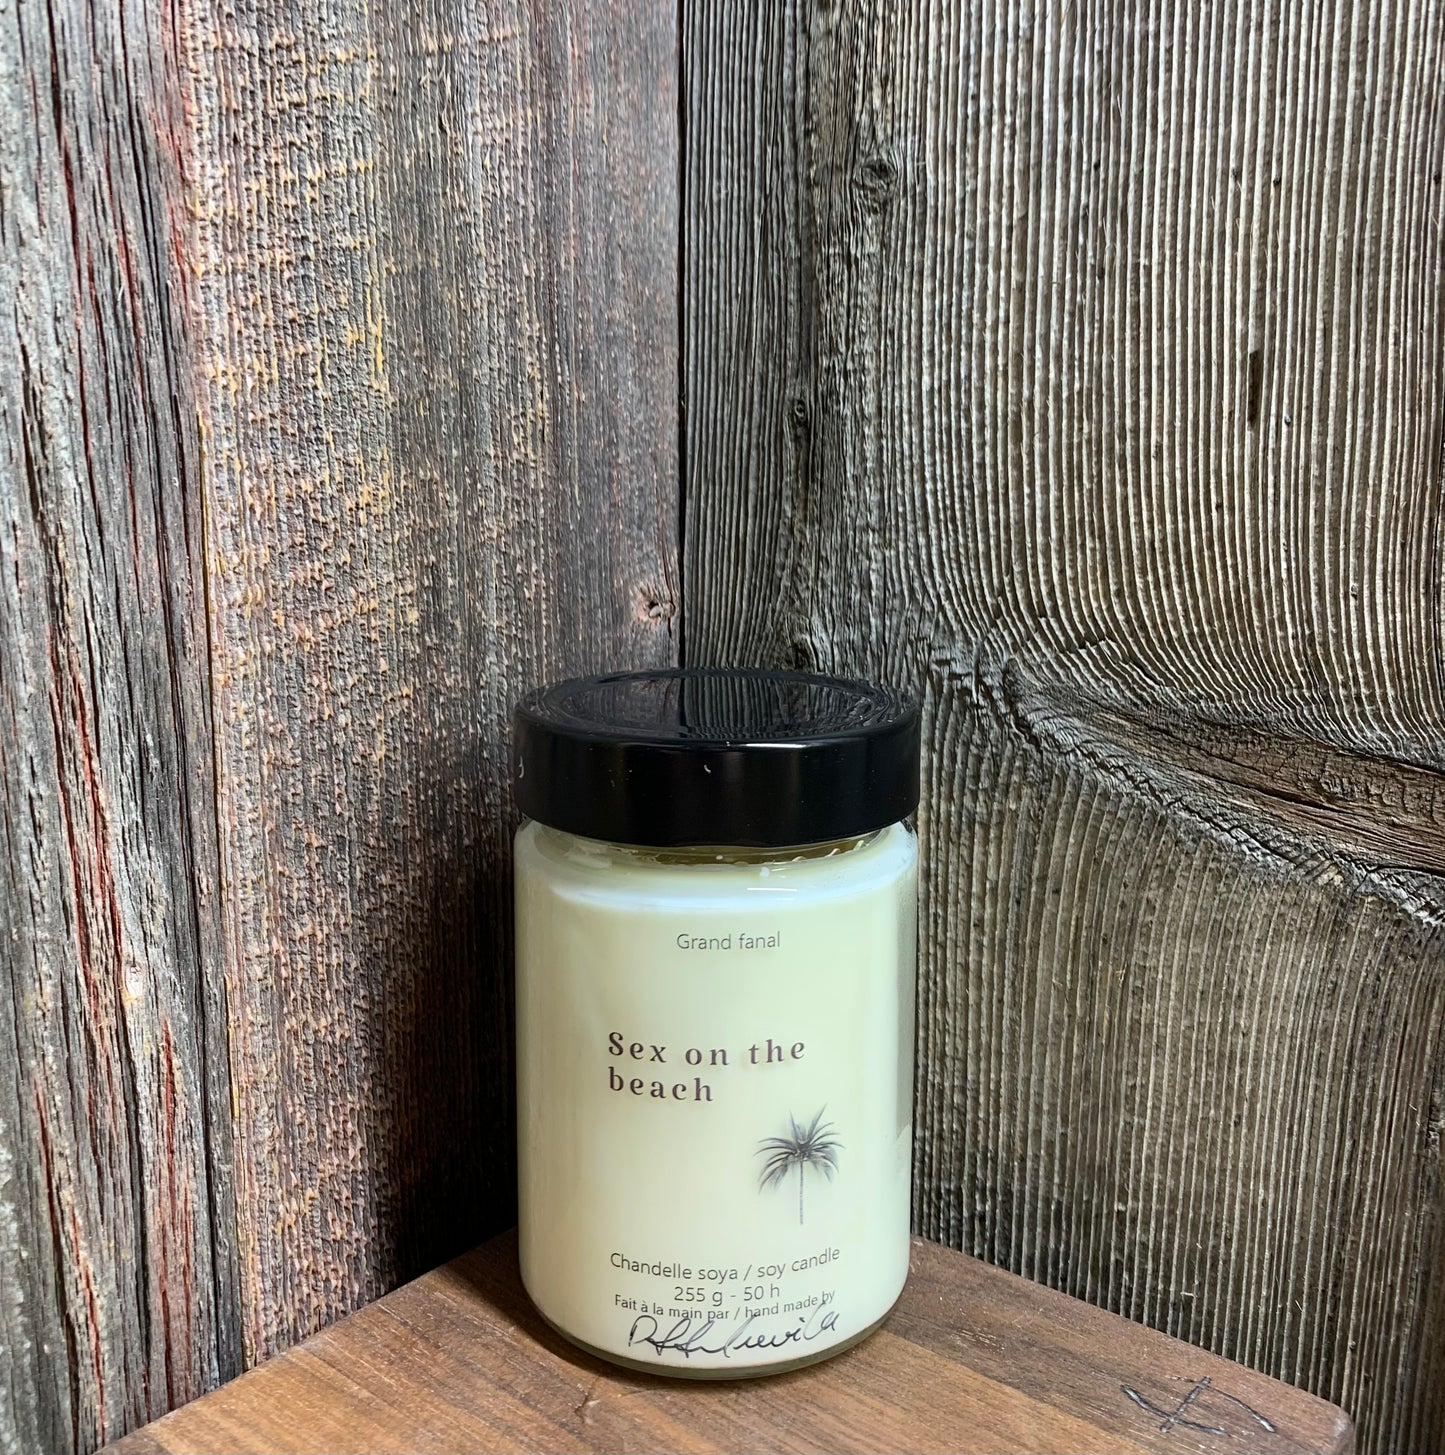 Sex on the beach candle